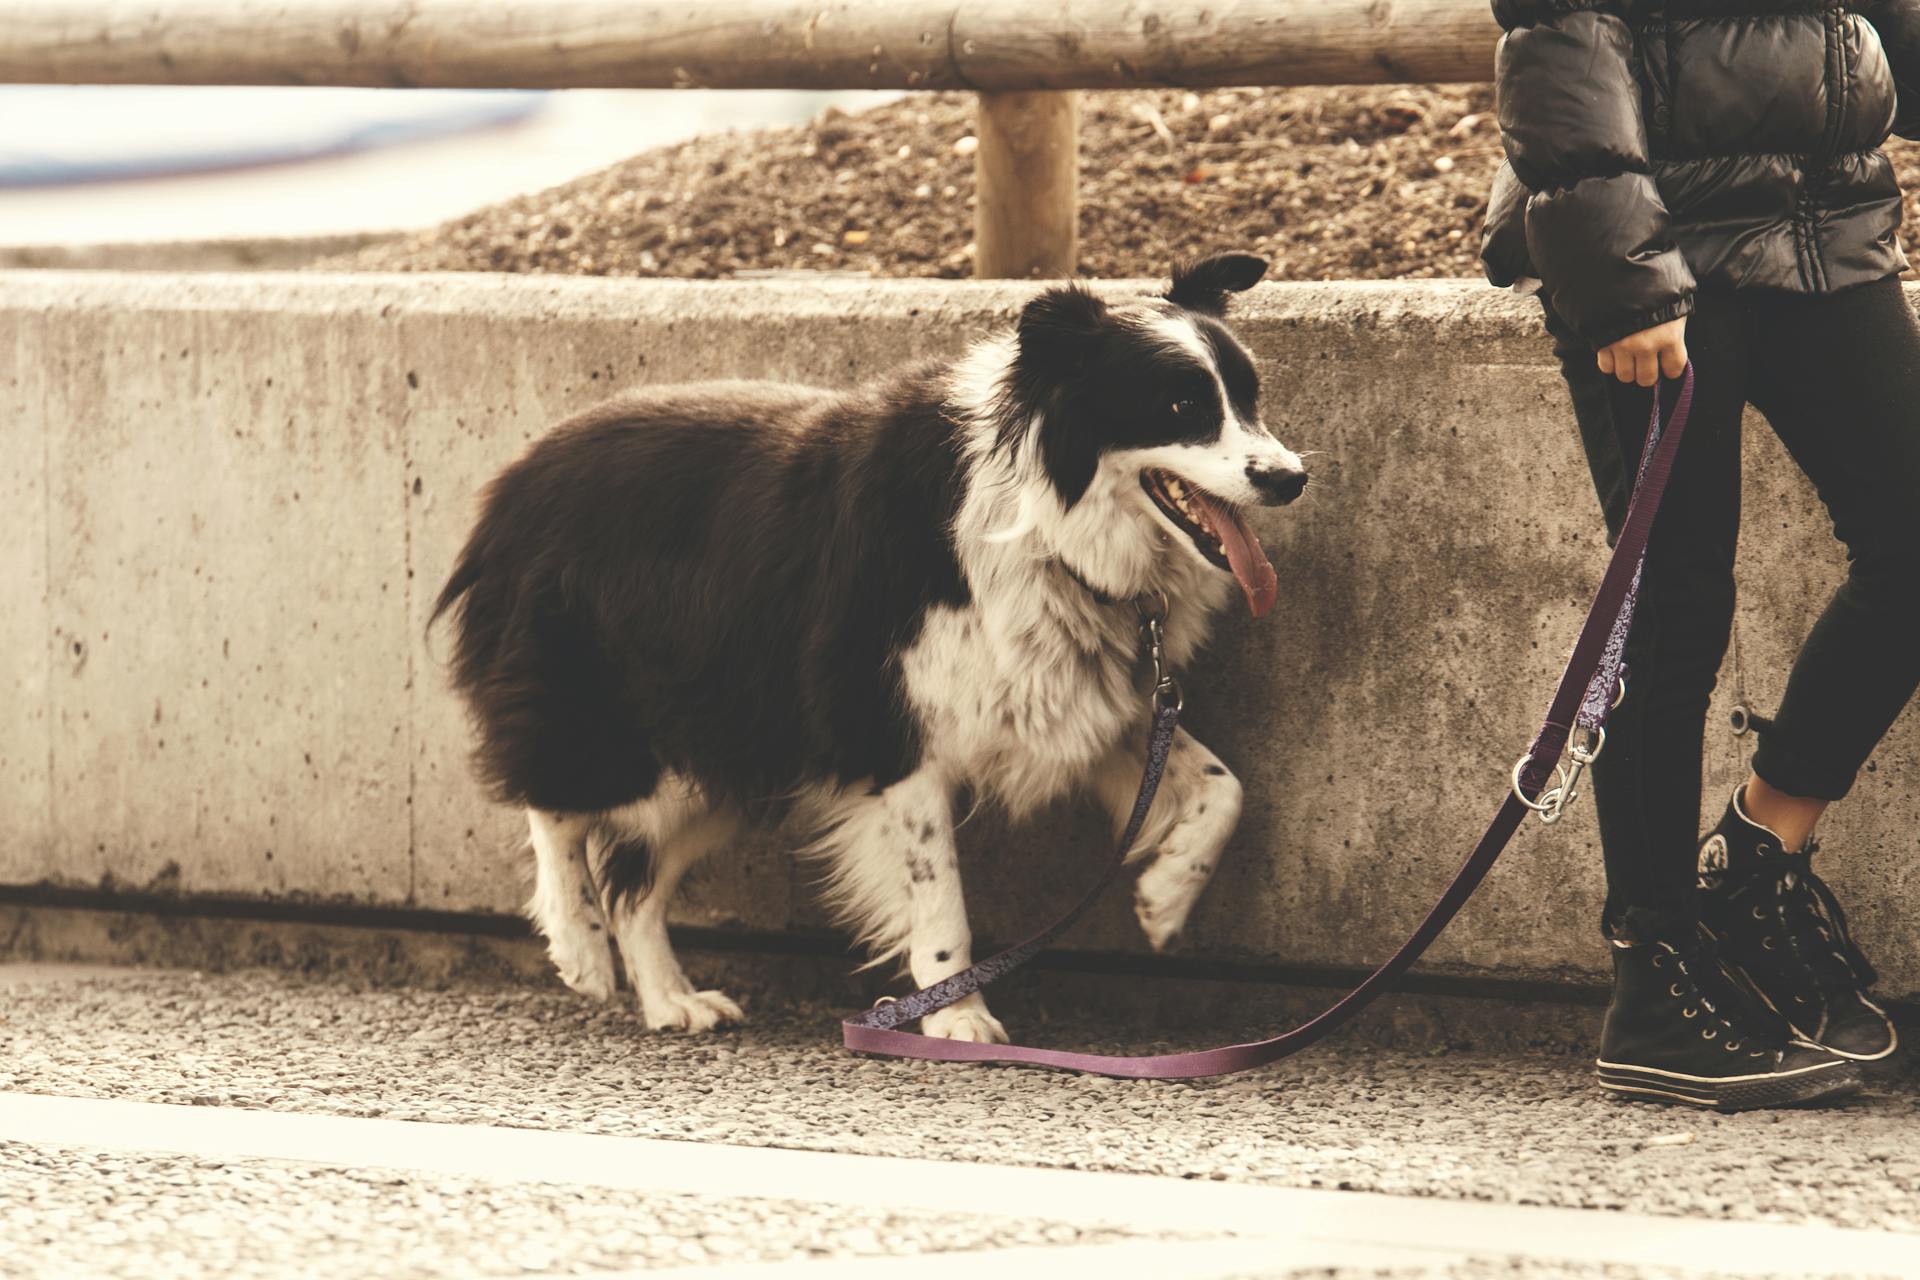 A woman walking a black and white dog by the street